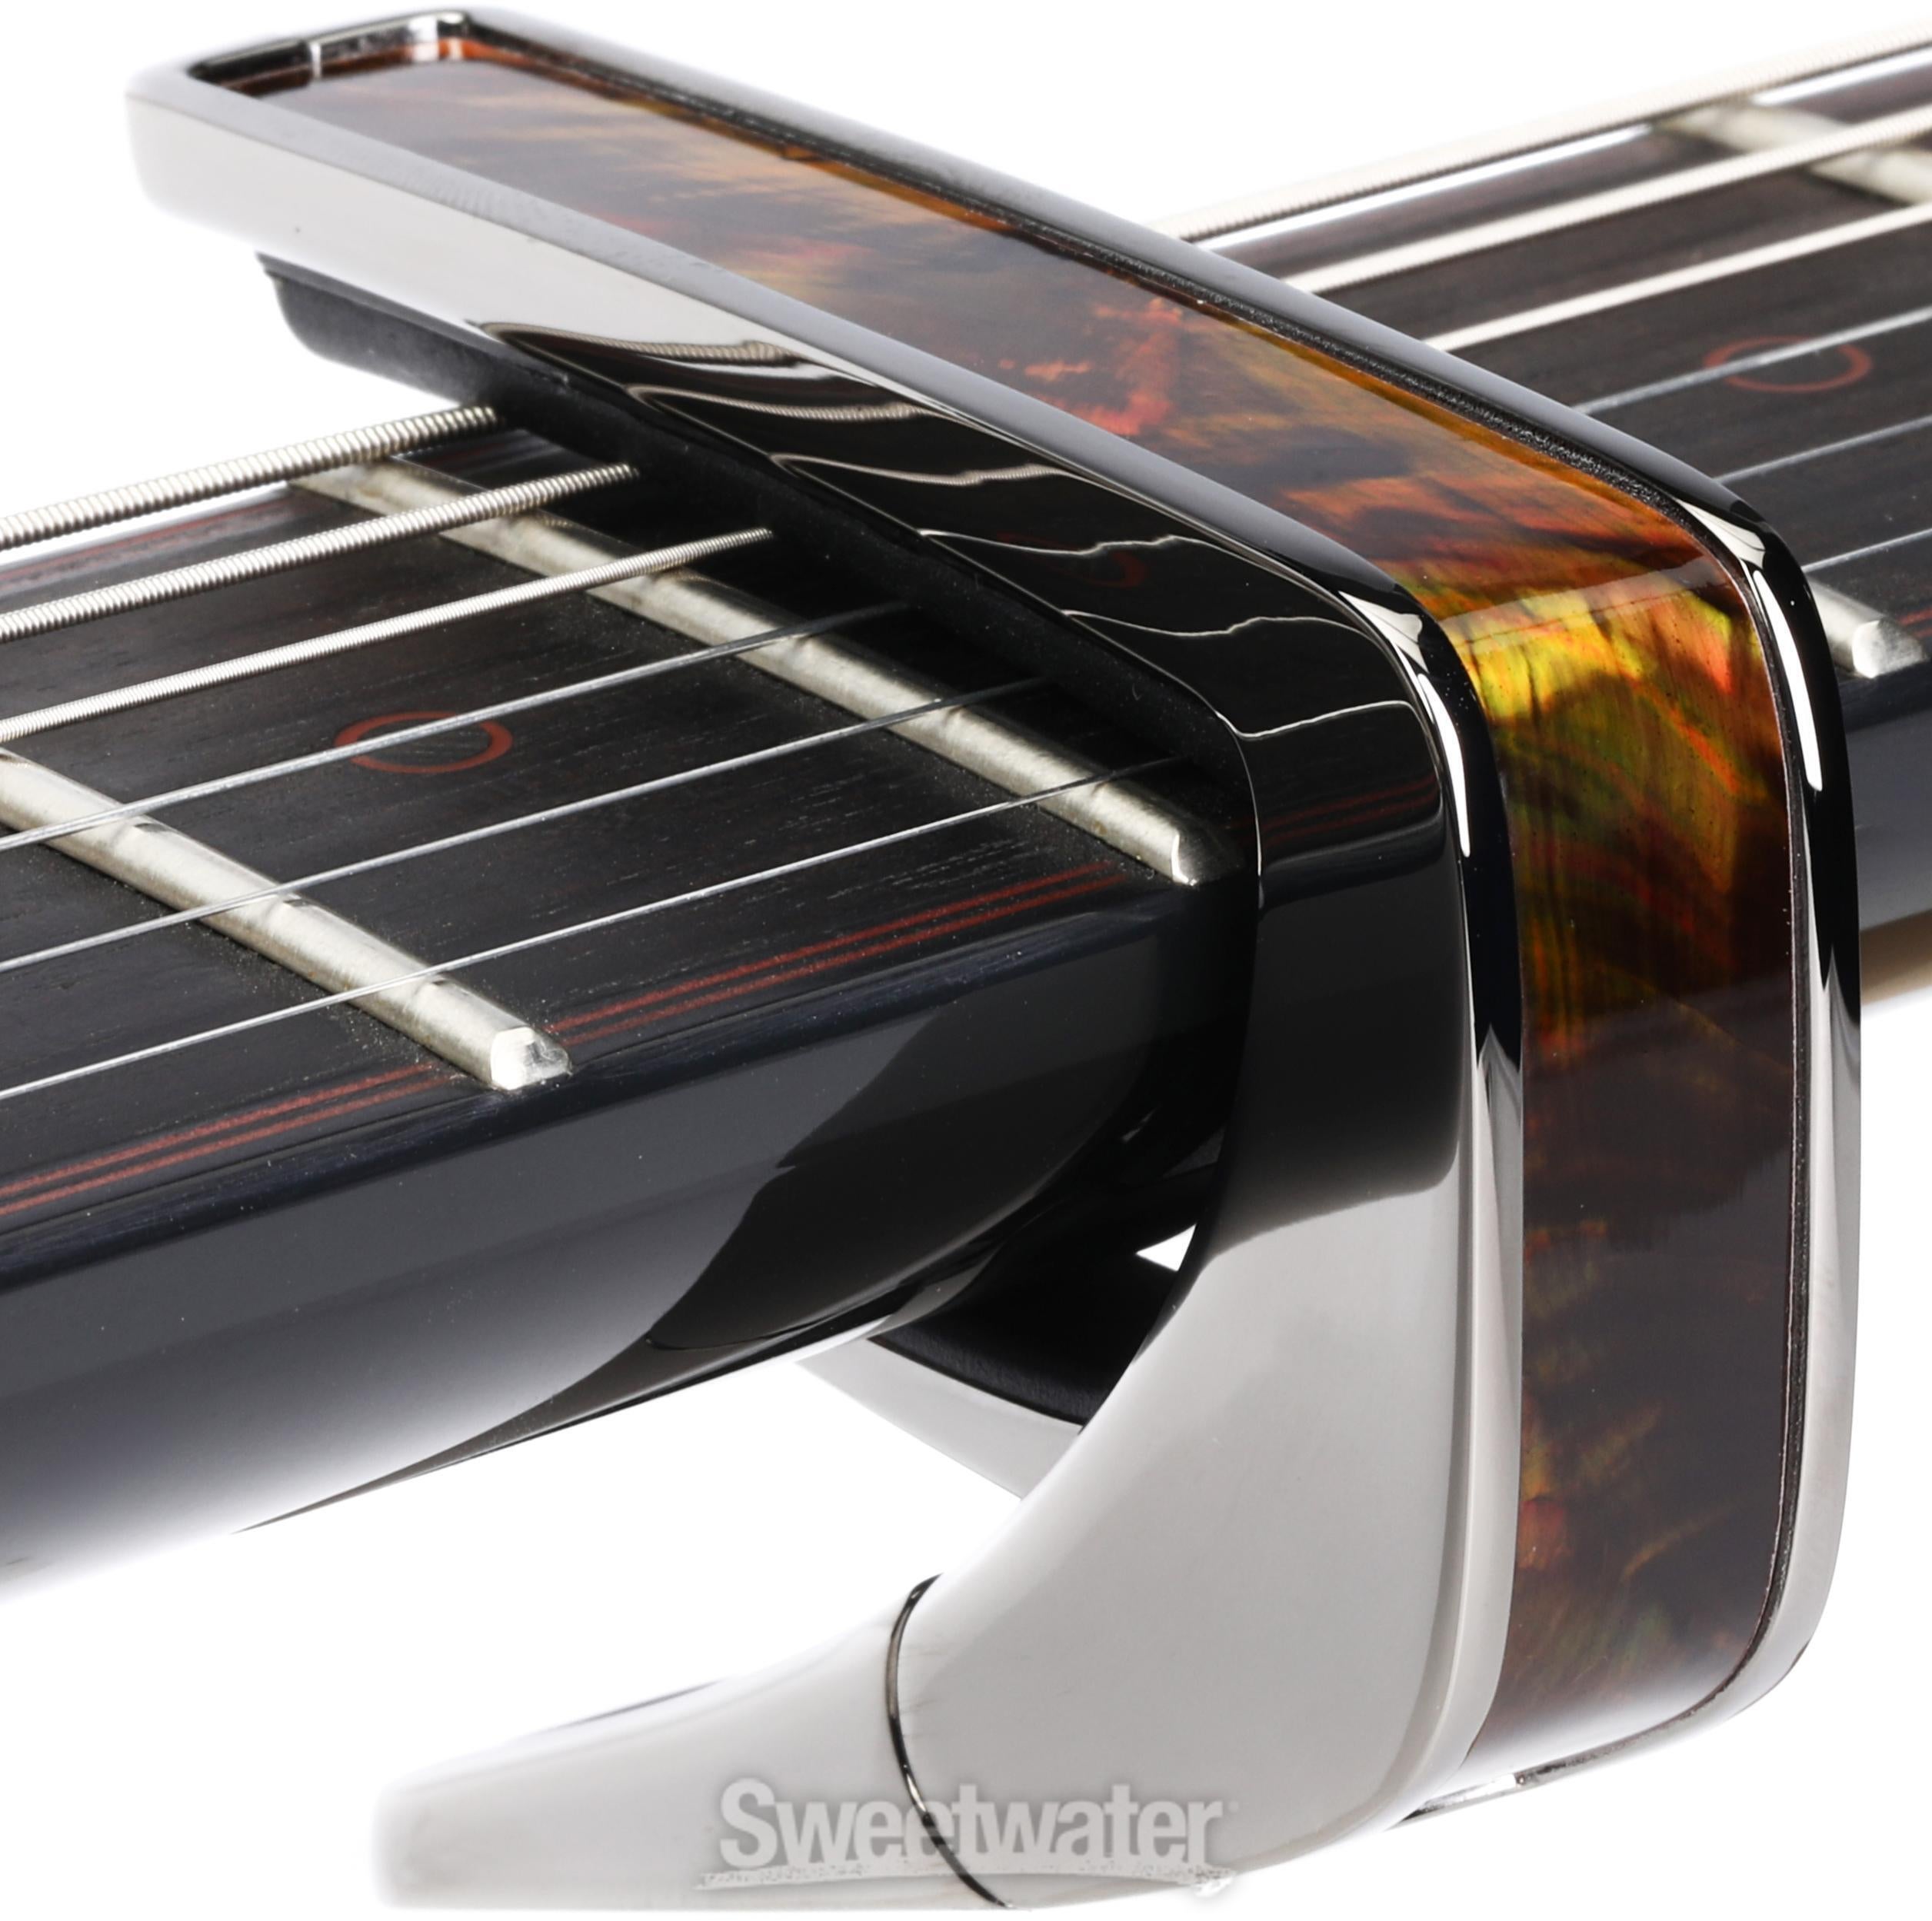 Thalia Shell Collection Capo - Black Chrome with Tennessee Whiskey 